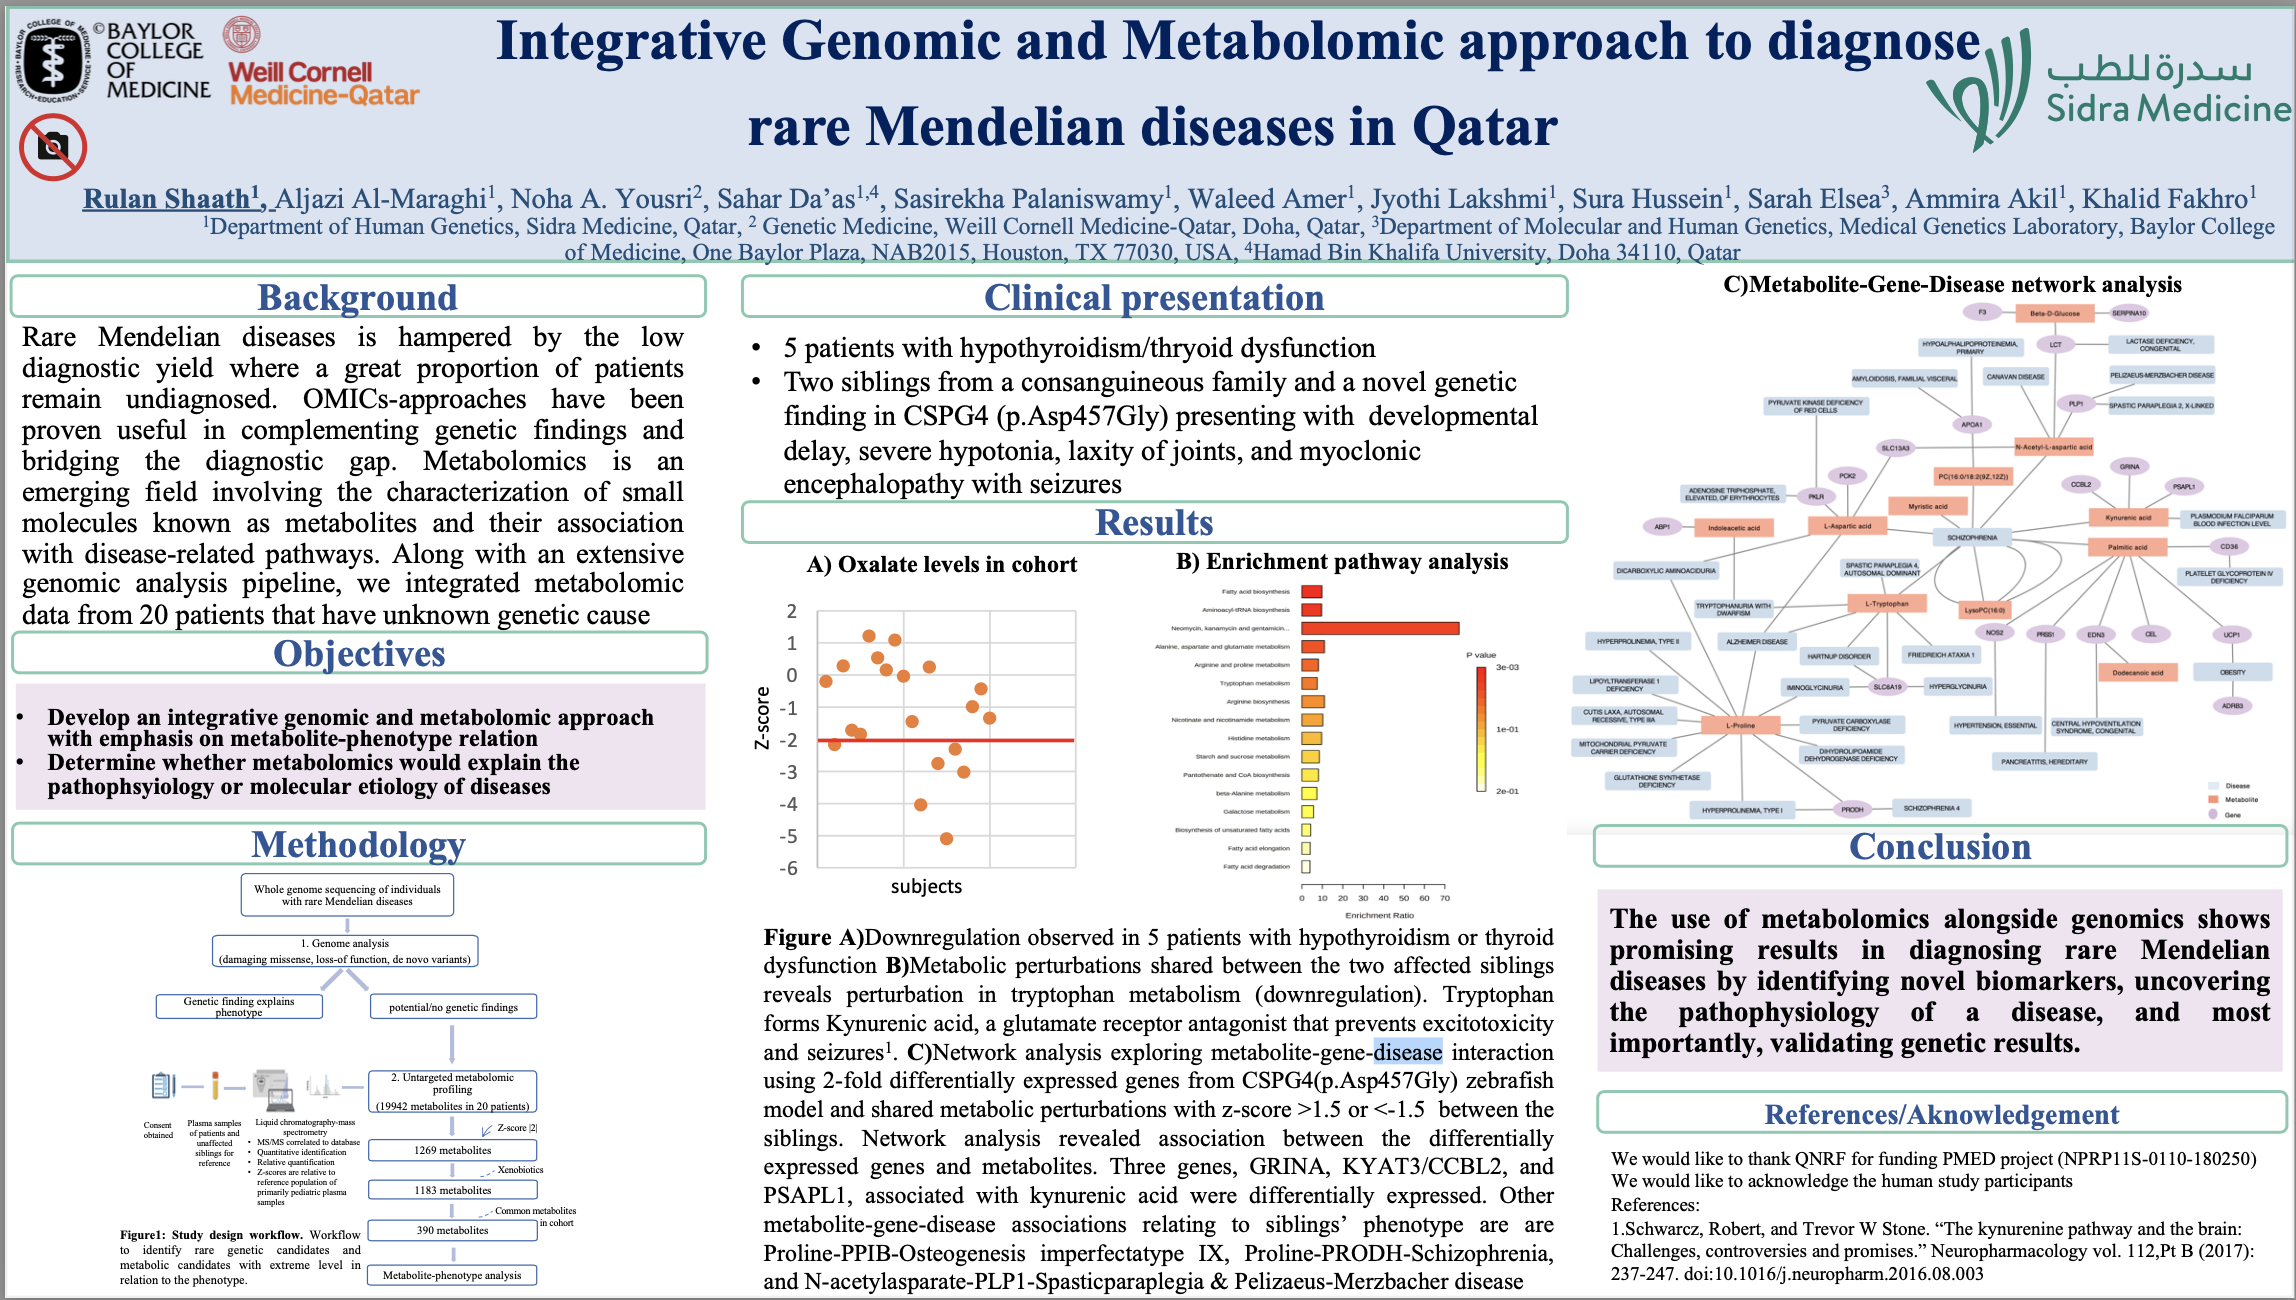 Integrative Genomic and Metabolomic approach to diagnose rare Mendelian diseases in Qatar